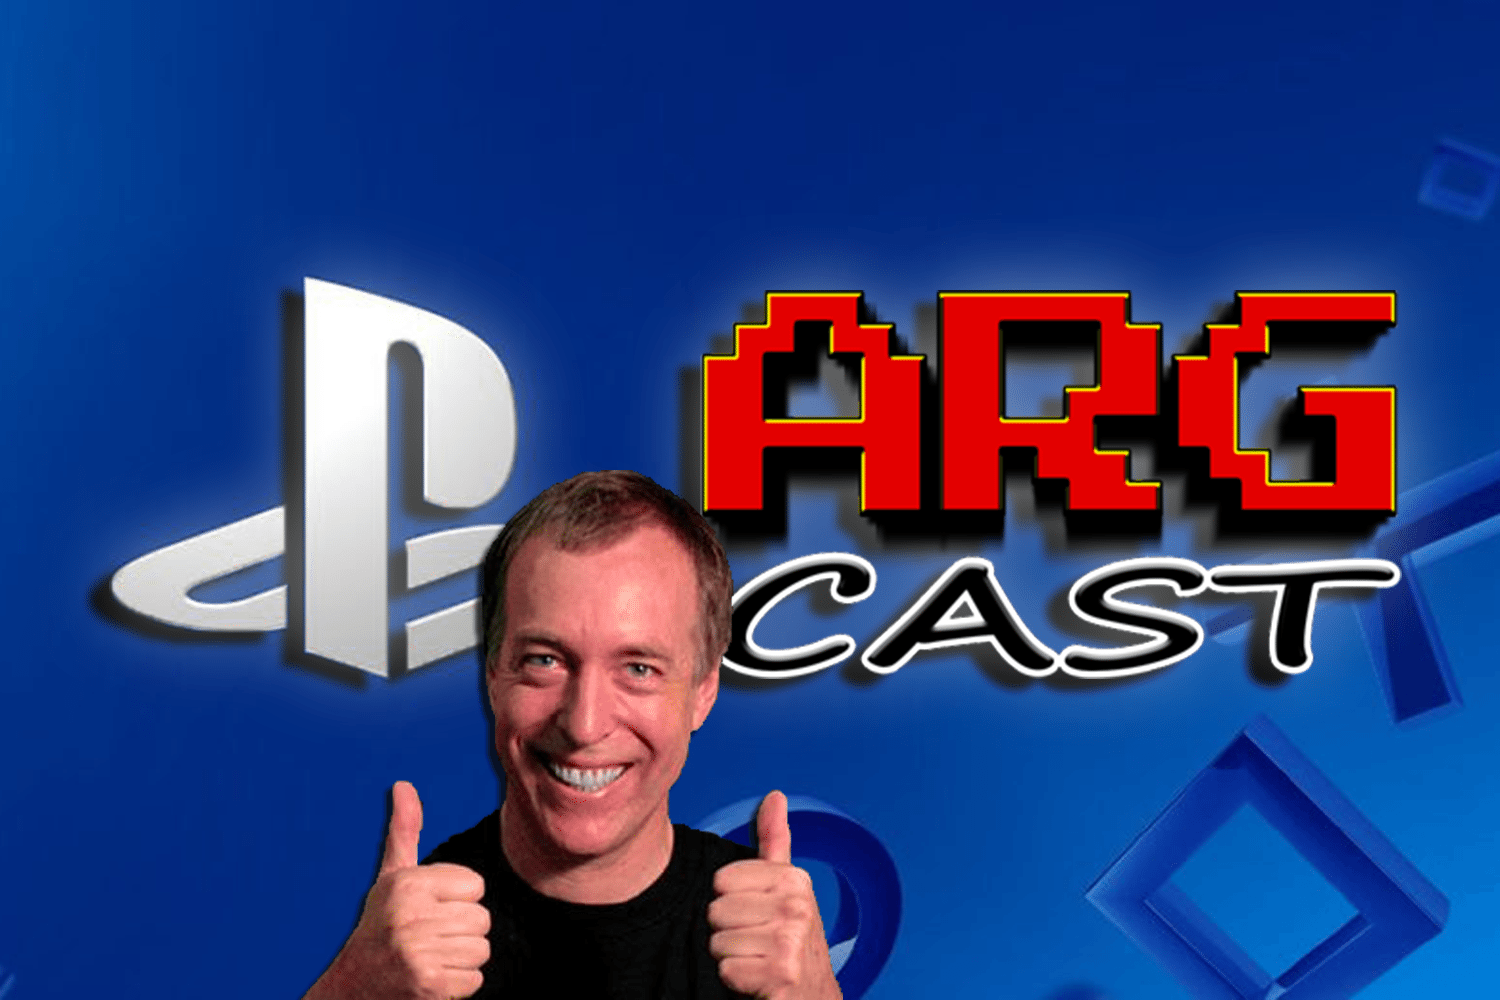 ARGcast #35: LIVE at PlayStation Experience - PSX 2016!